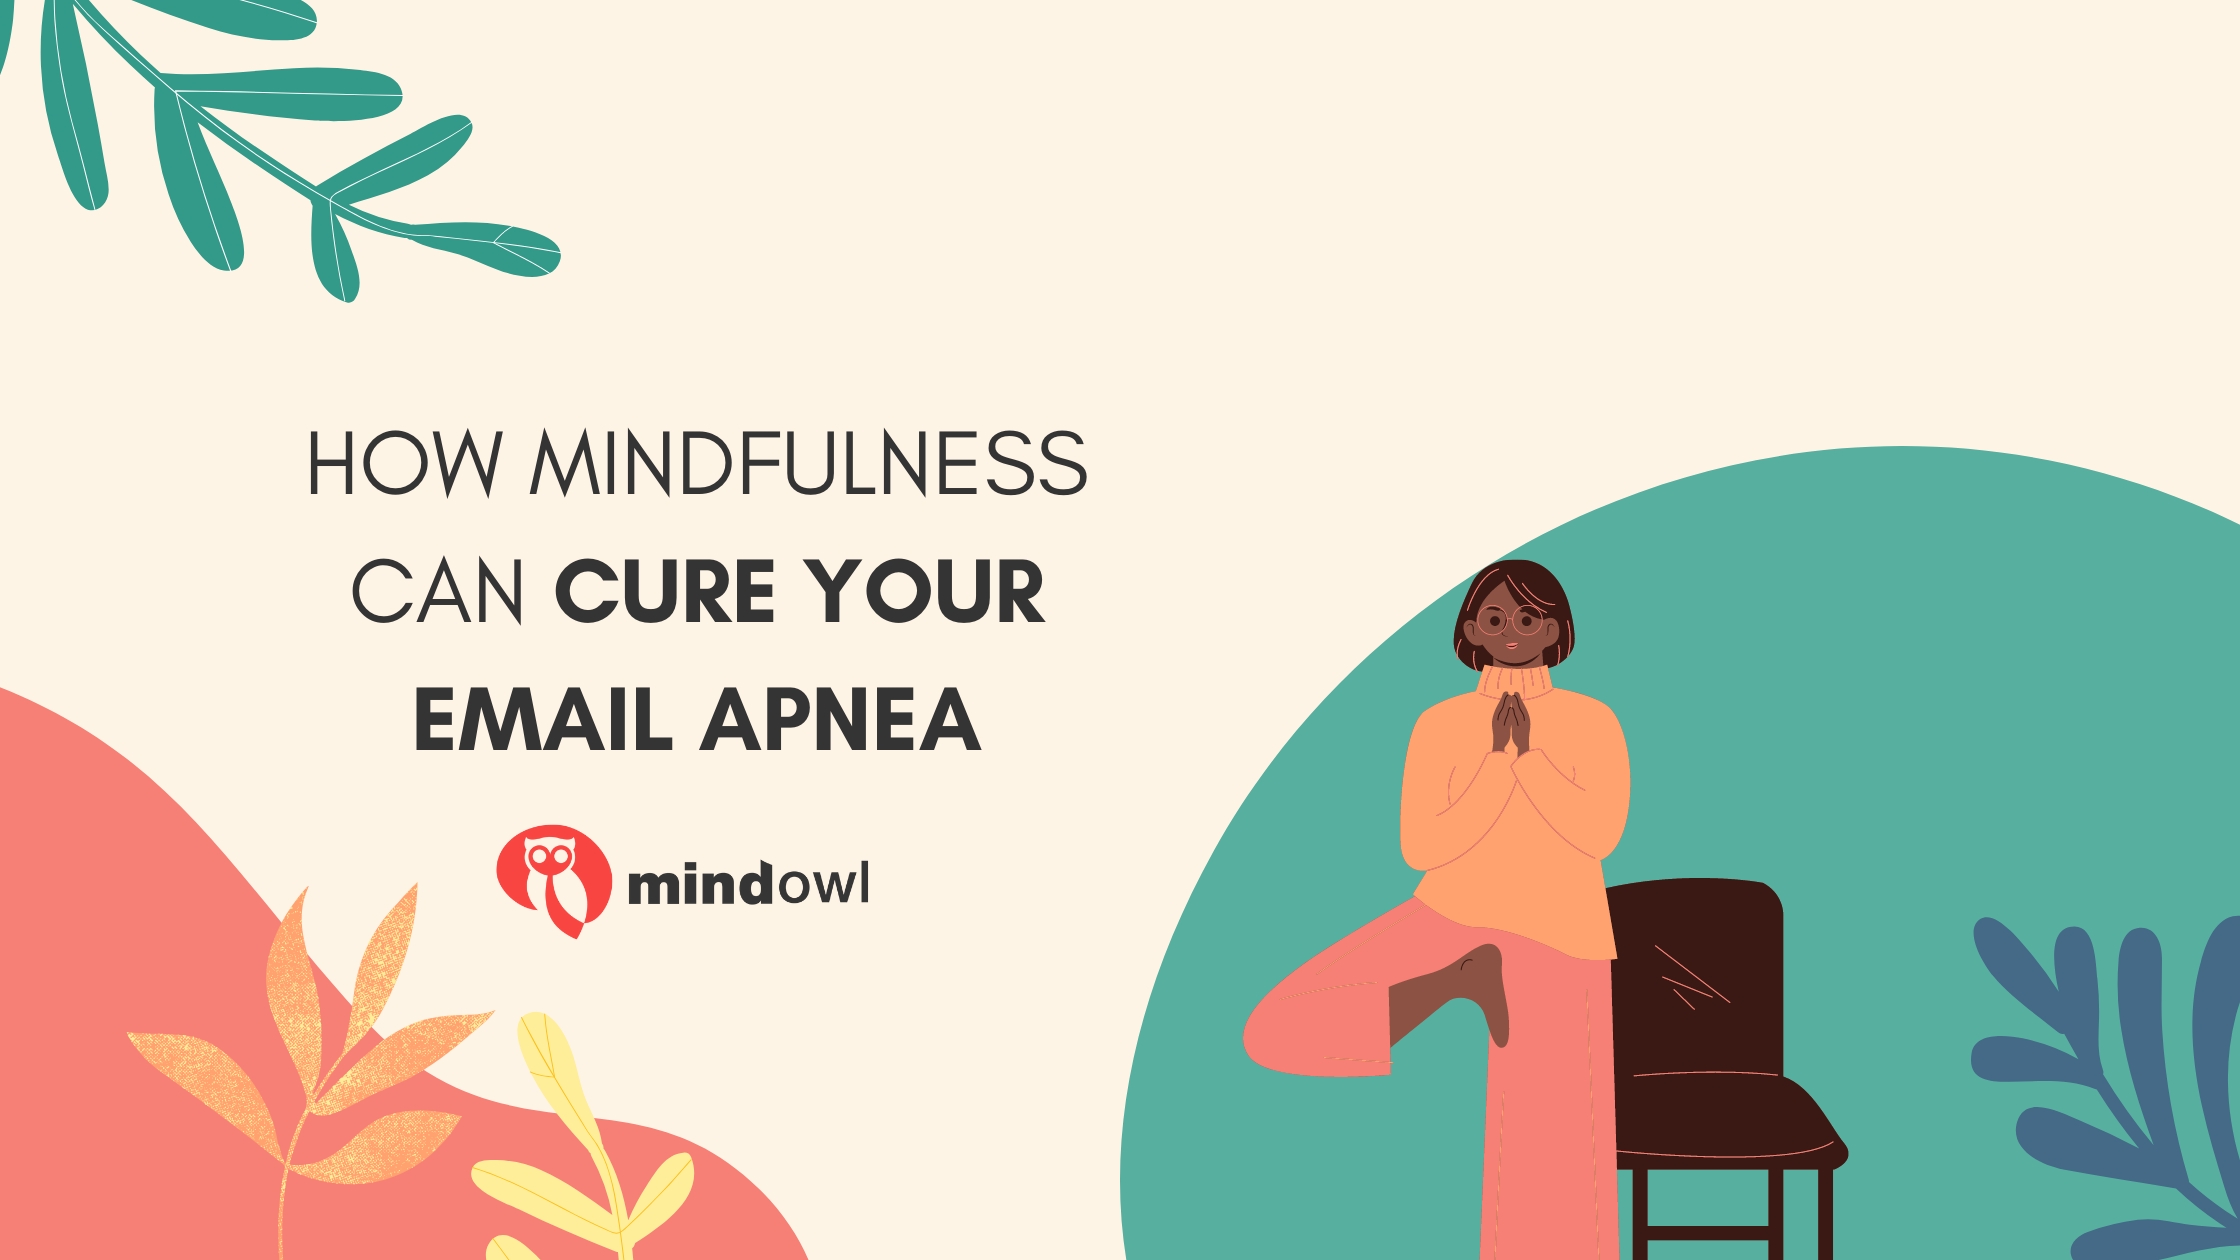 How mindfulness can cure your email apnea